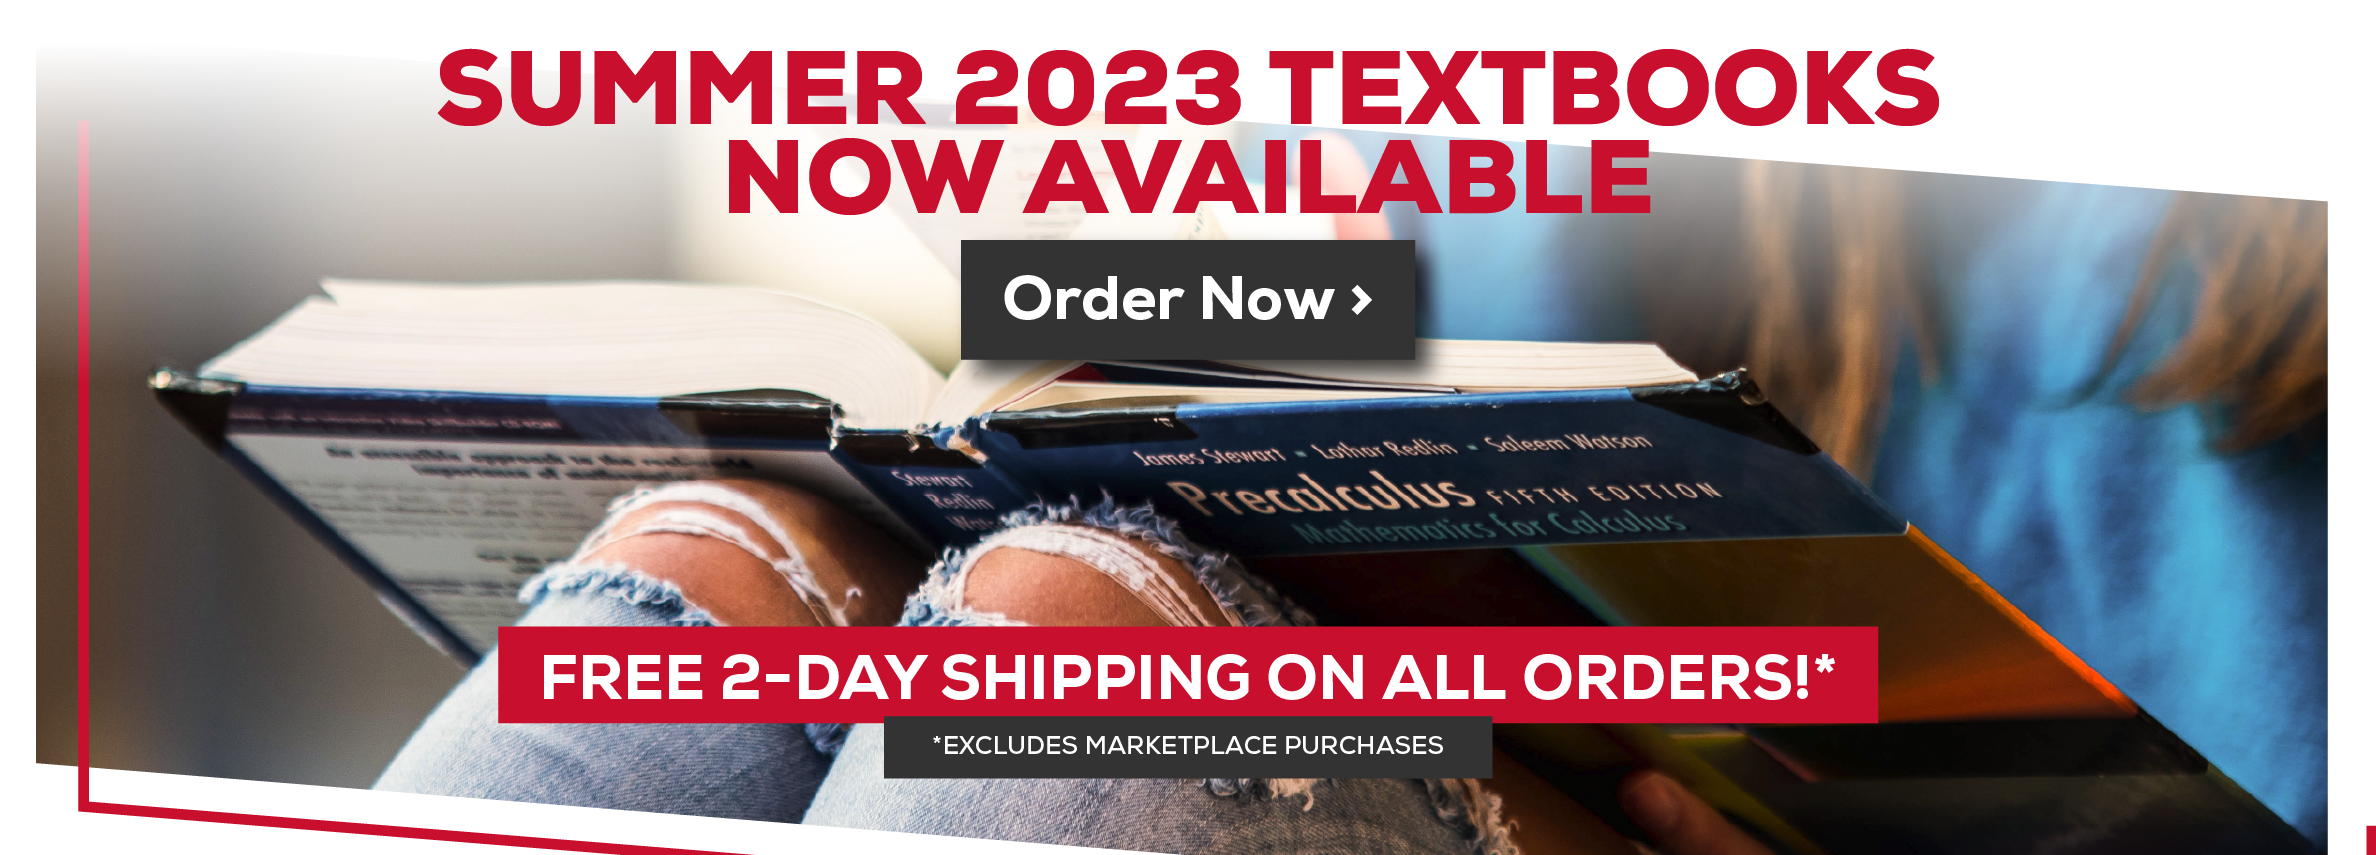 SUMMER 2023 TEXTBOOKS NOW AVAILABLE Order Now Ã¢â‚¬Âº Lahar getlin - Soleom Warson FISTA CONTION Nor Calculus FREE 2-DAY SHIPPING ON ALL ORDERS!* *EXCLUDES MARKETPLACE PURCHASES